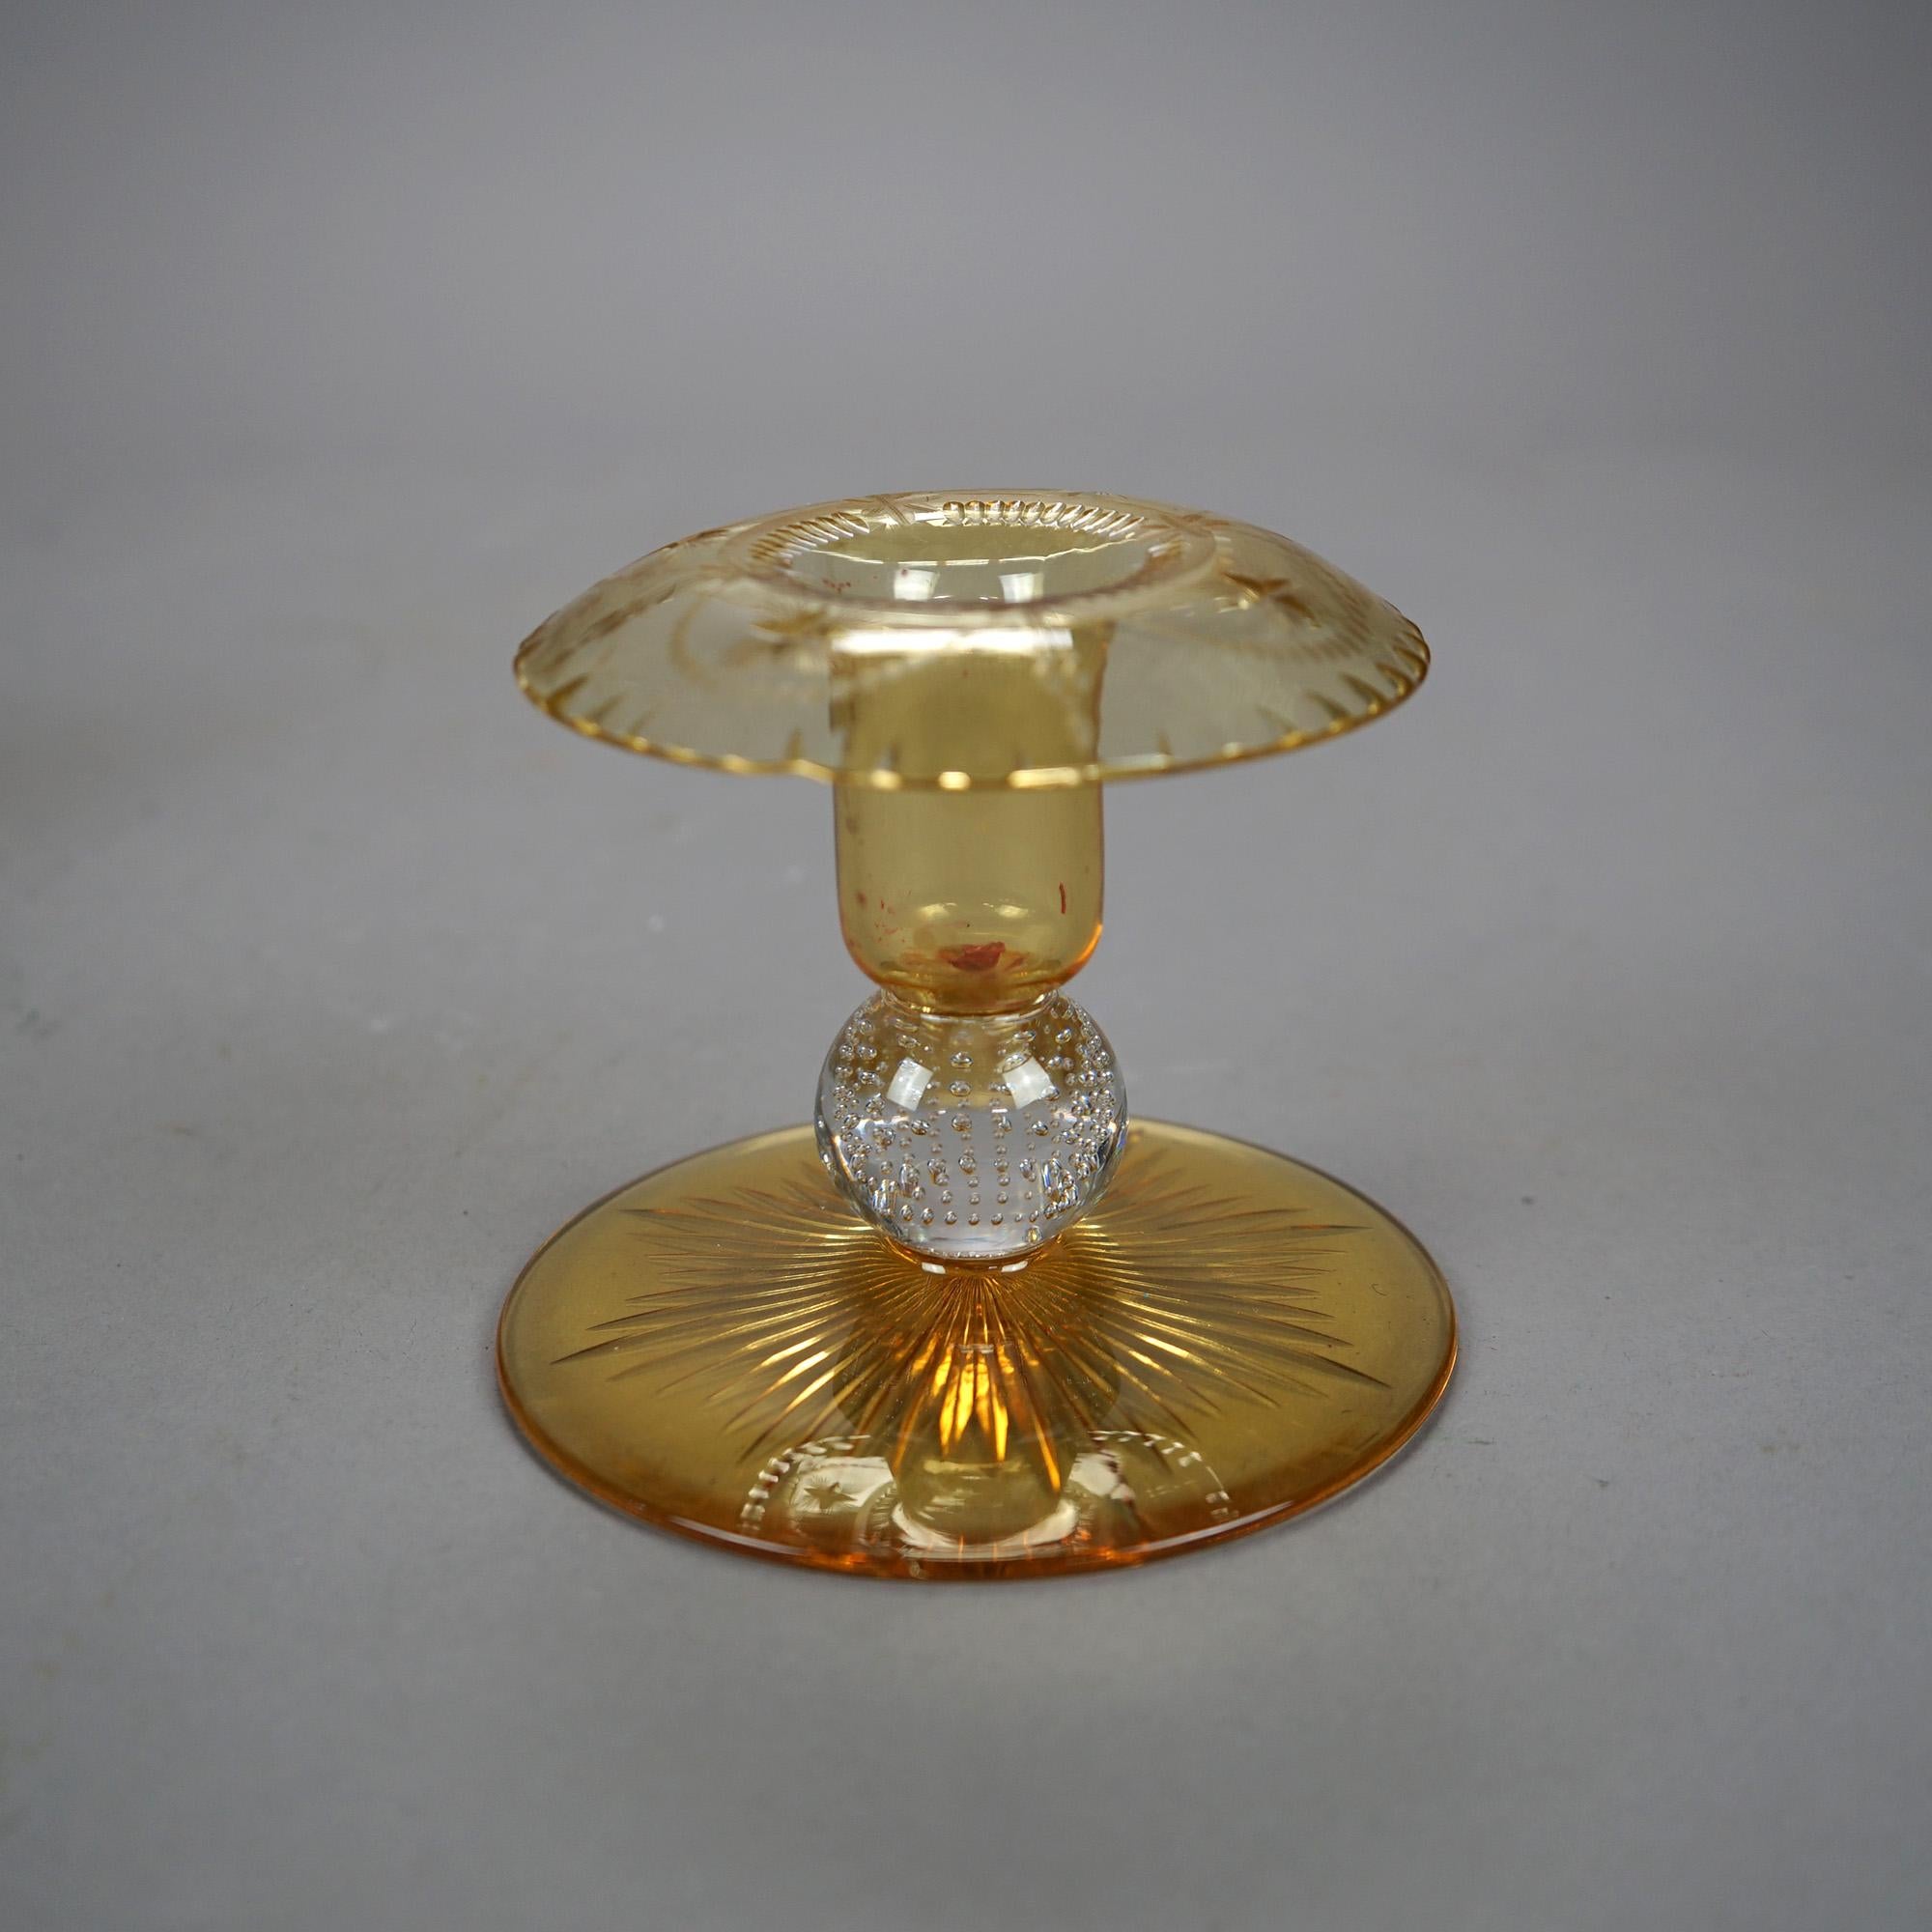 American Antique Pair of Pairpoint Amber Cut Glass Candlesticks Circa 1920